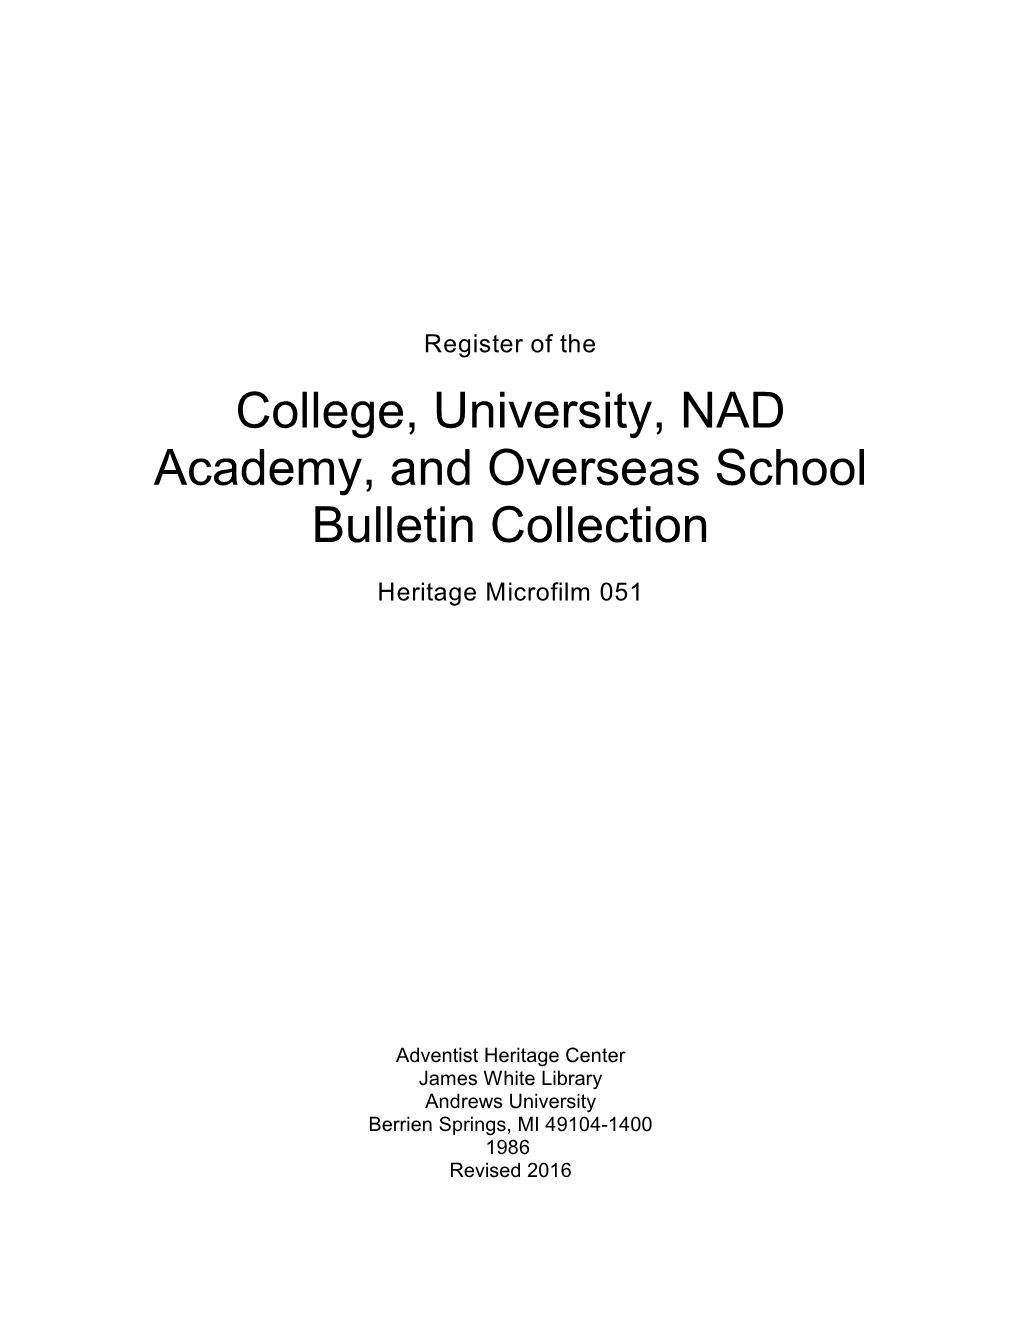 College, University, NAD Academy, and Overseas School Bulletin Collection